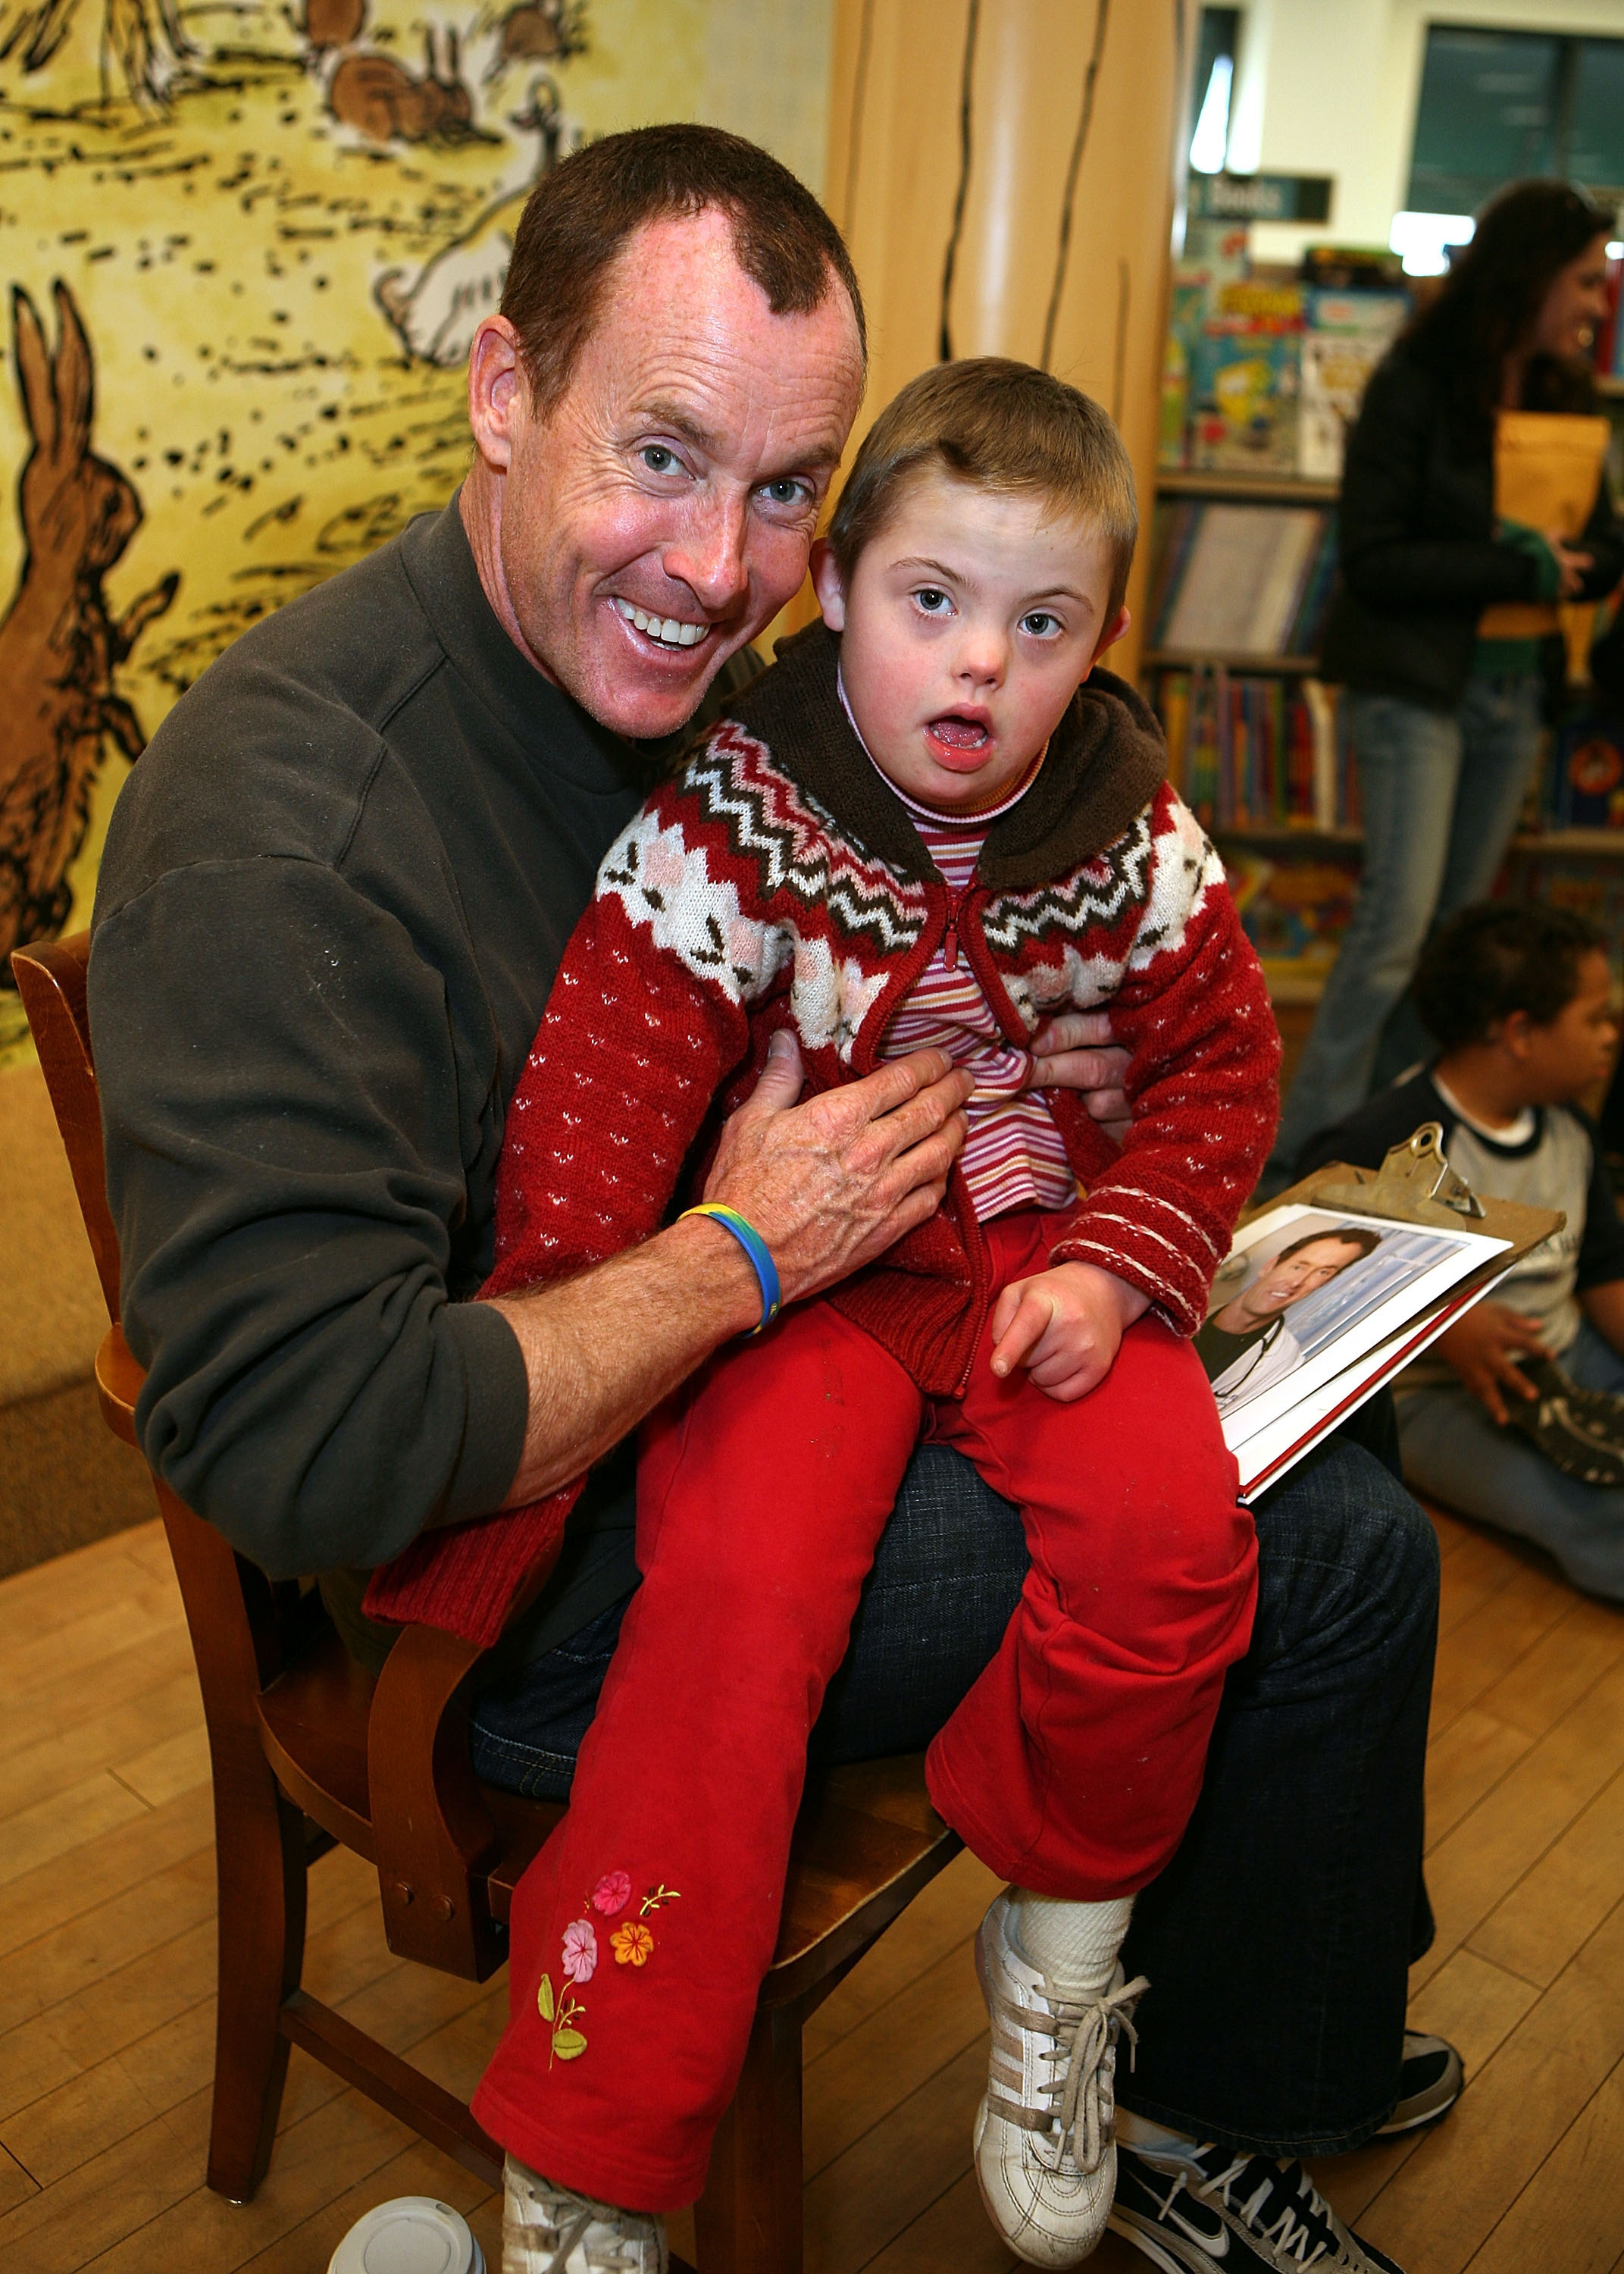 John C. McGinley taking pictures after a reading for children with Down syndrome at Barnes & Noble in California in 2007 | Source: Getty images